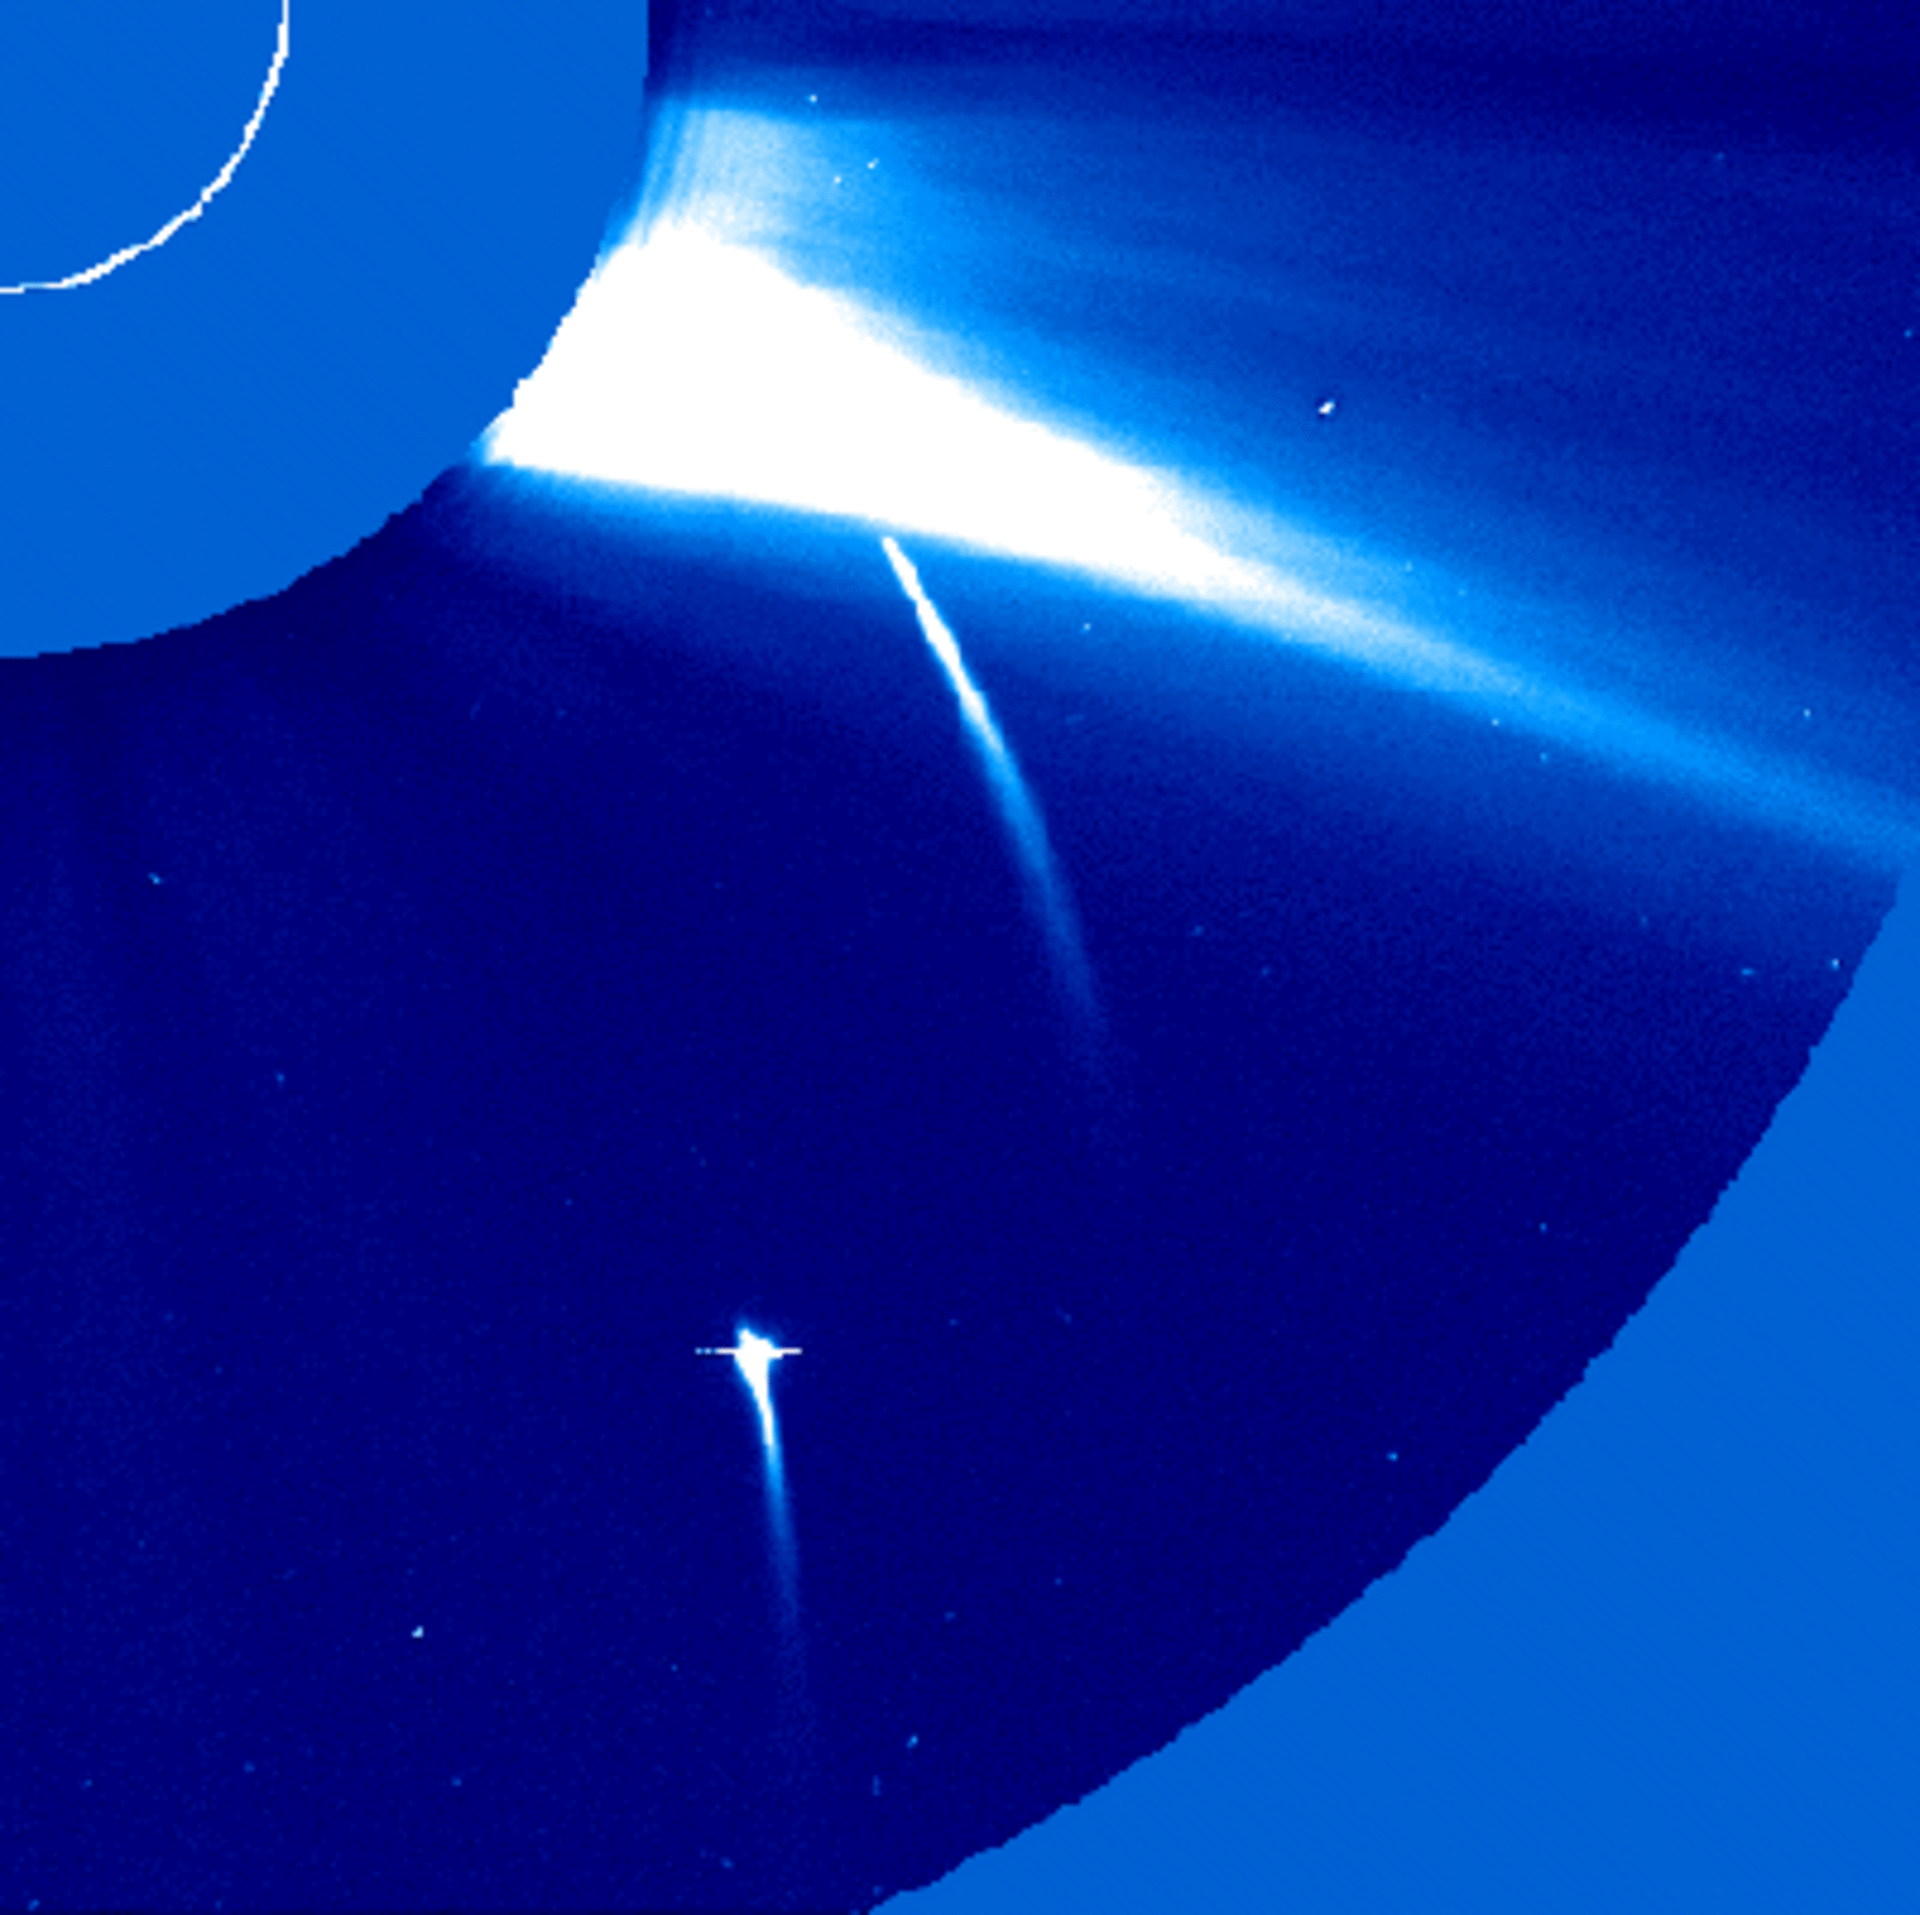 100 and counting: SOHO's score as the world's top comet finder